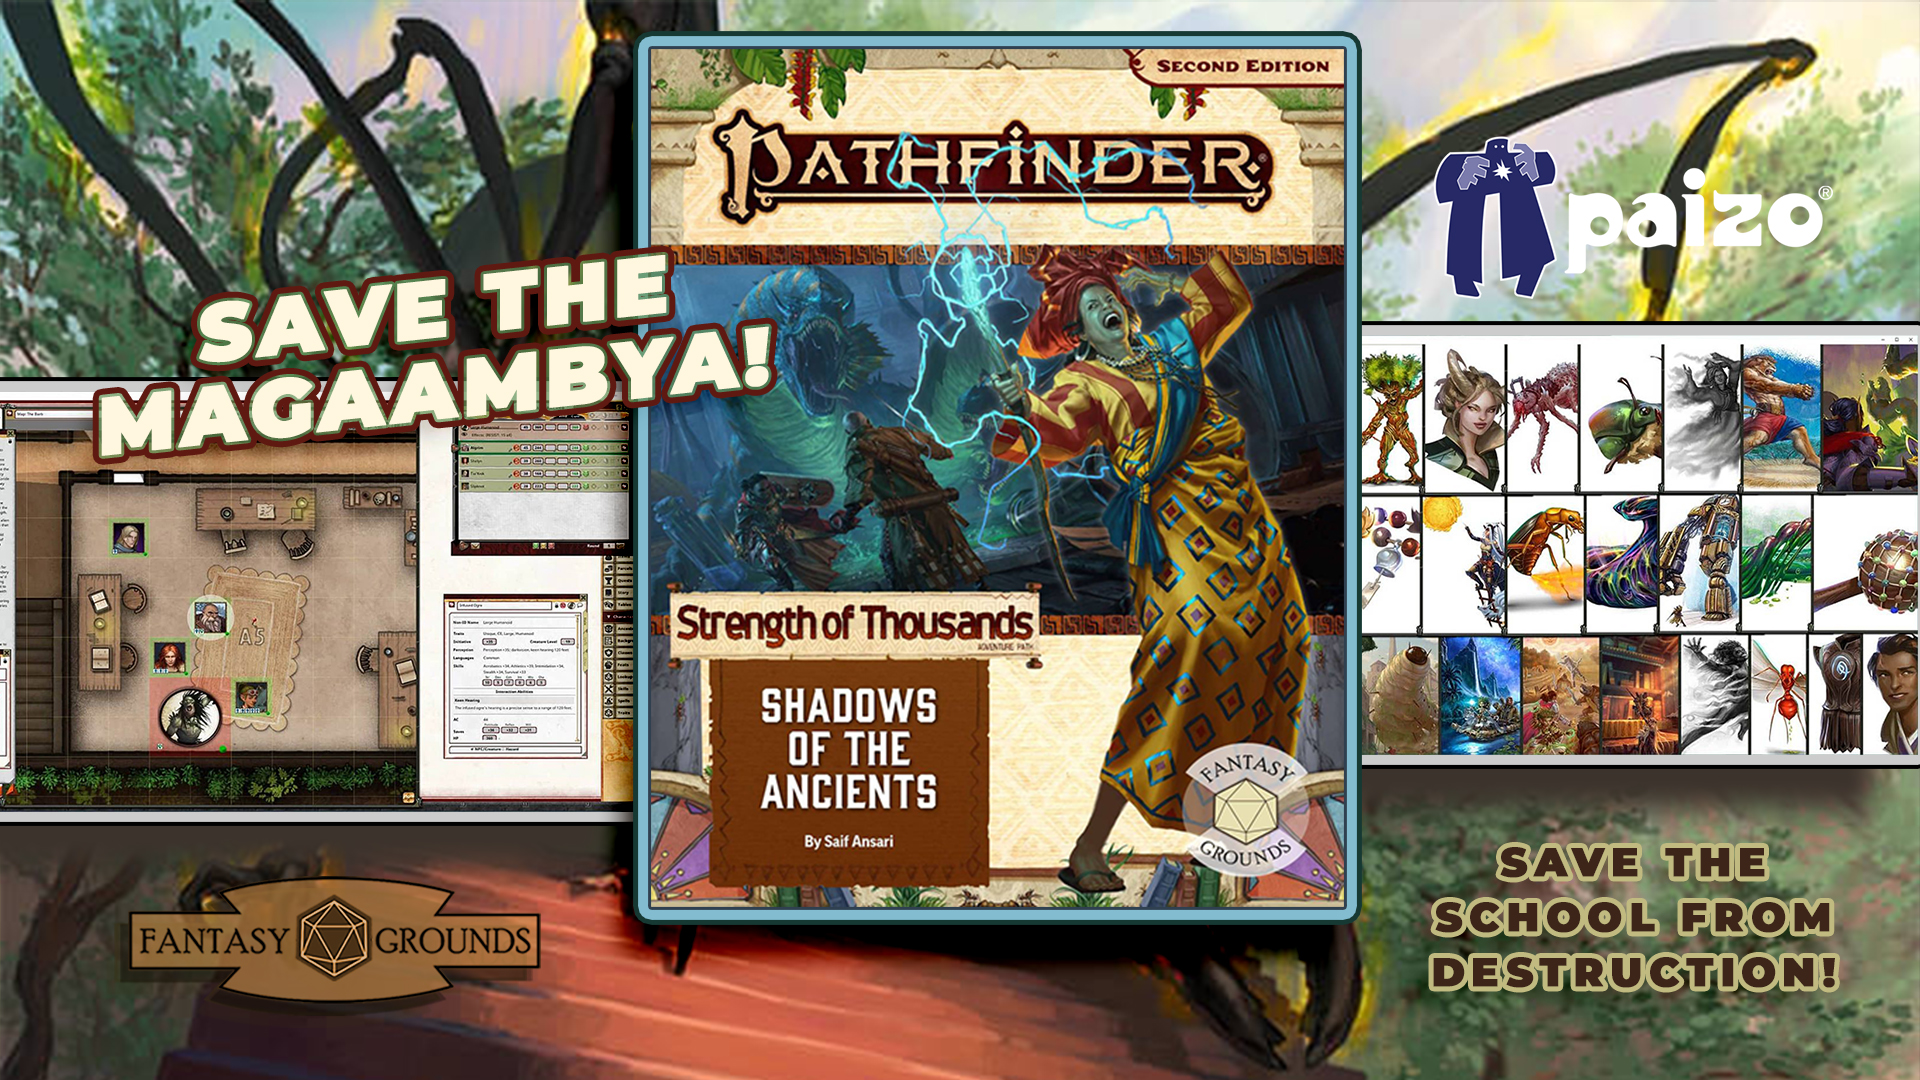 Pathfinder 2 RPG - Strength of Thousands AP 6 Shadows of the Ancients(PZOSMWPZO90174FG).jpg